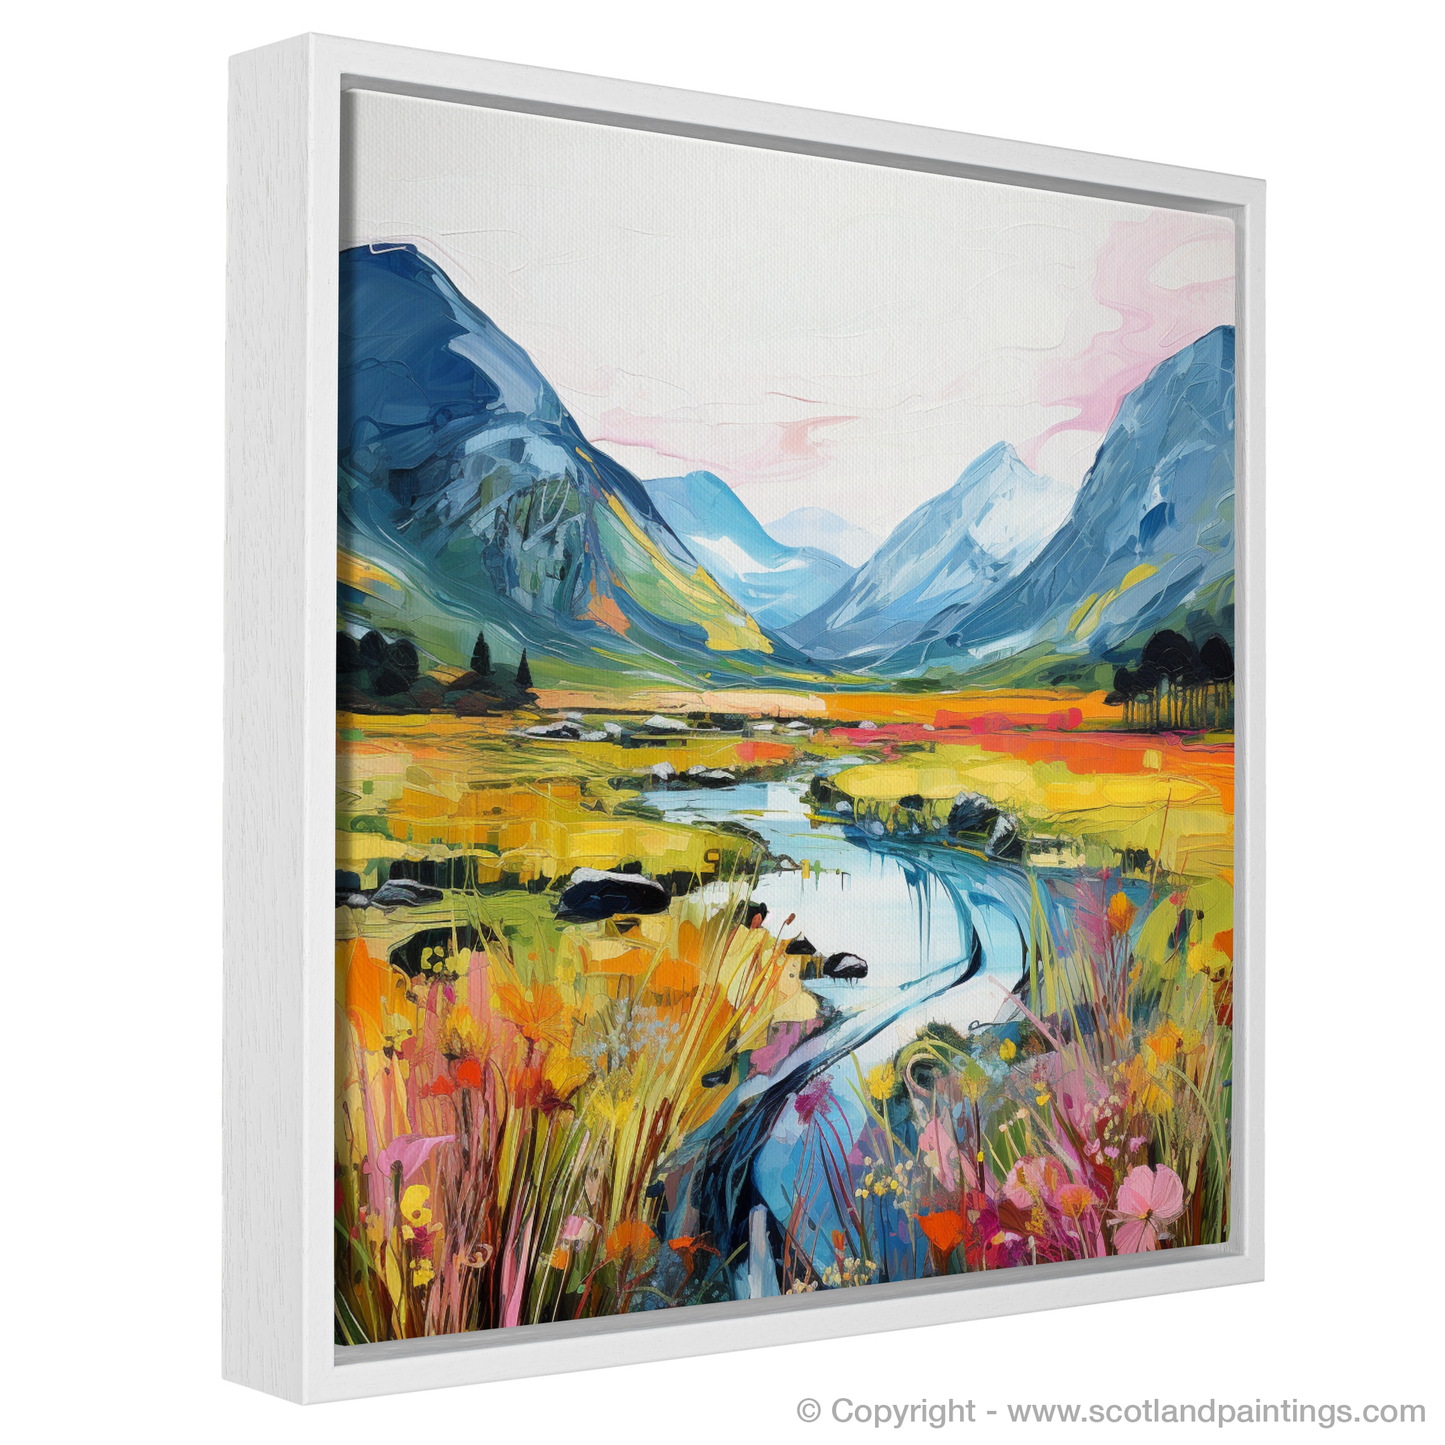 Painting and Art Print of Glen Coe, Highlands in summer entitled "Summer Embrace of Glen Coe".